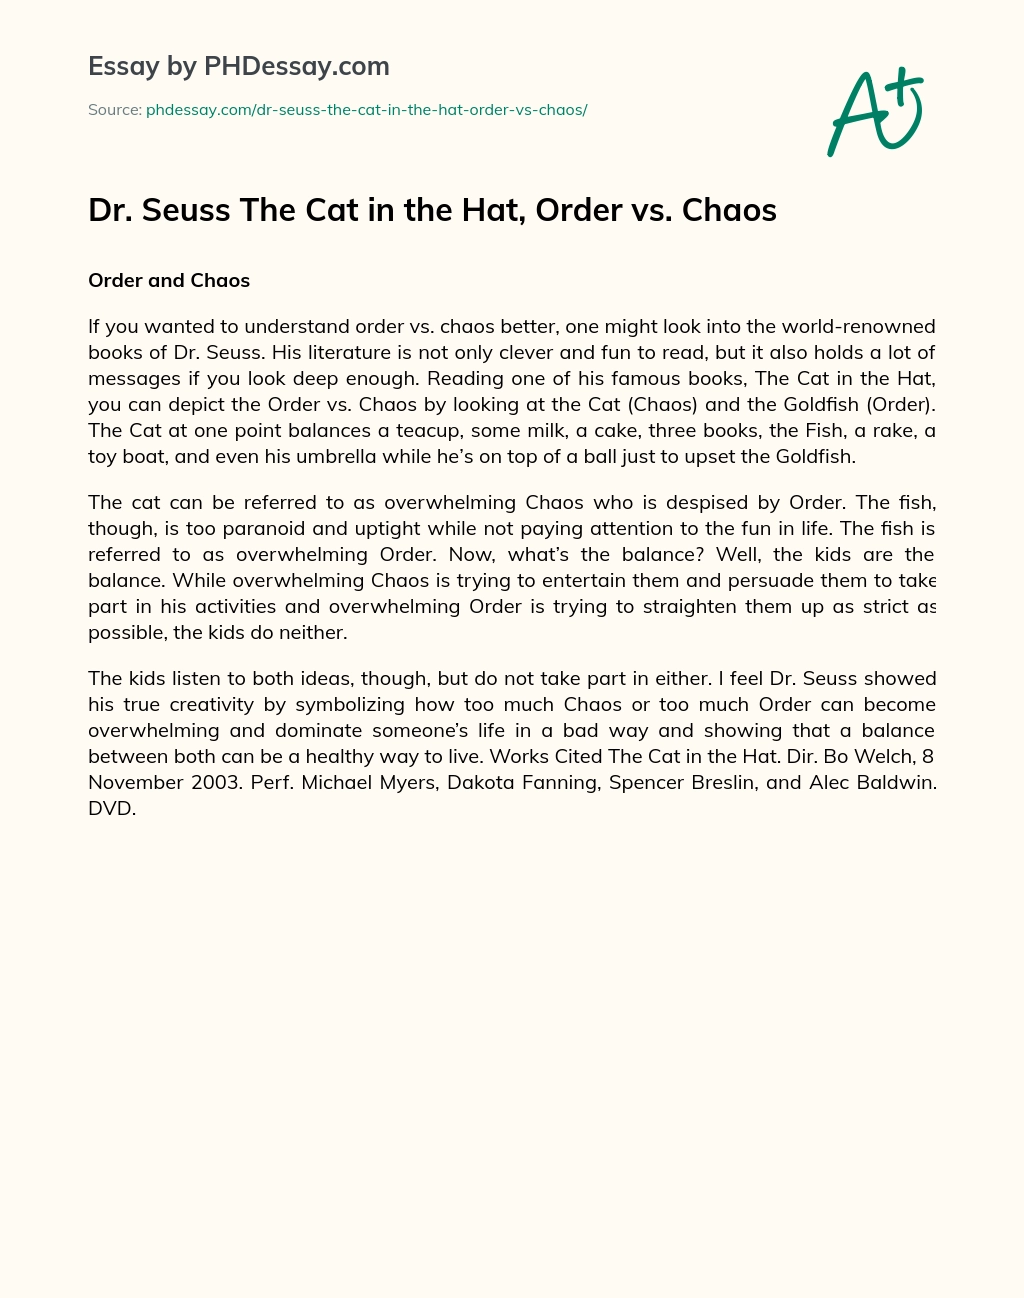 Dr. Seuss The Cat in the Hat, Order vs. Chaos essay